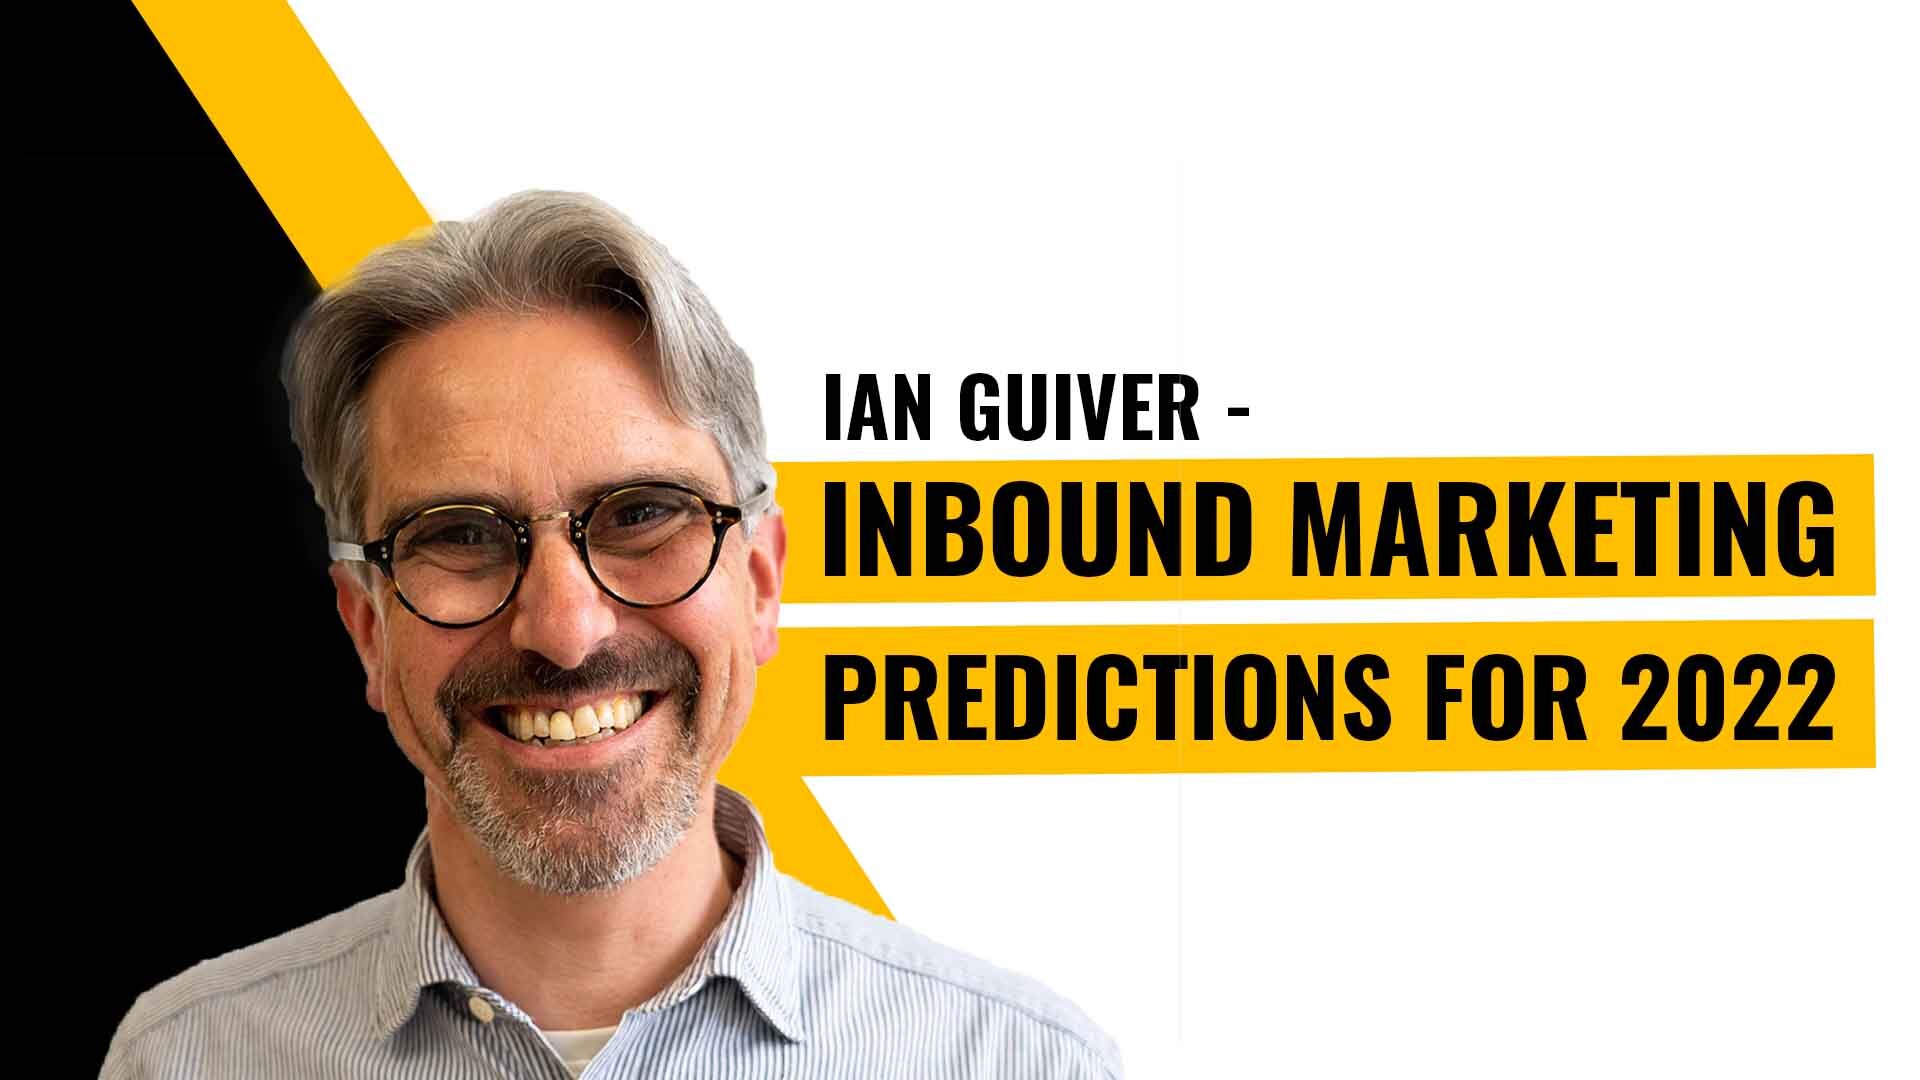 Ian Guiver's Inbound Marketing Predictions for 2022